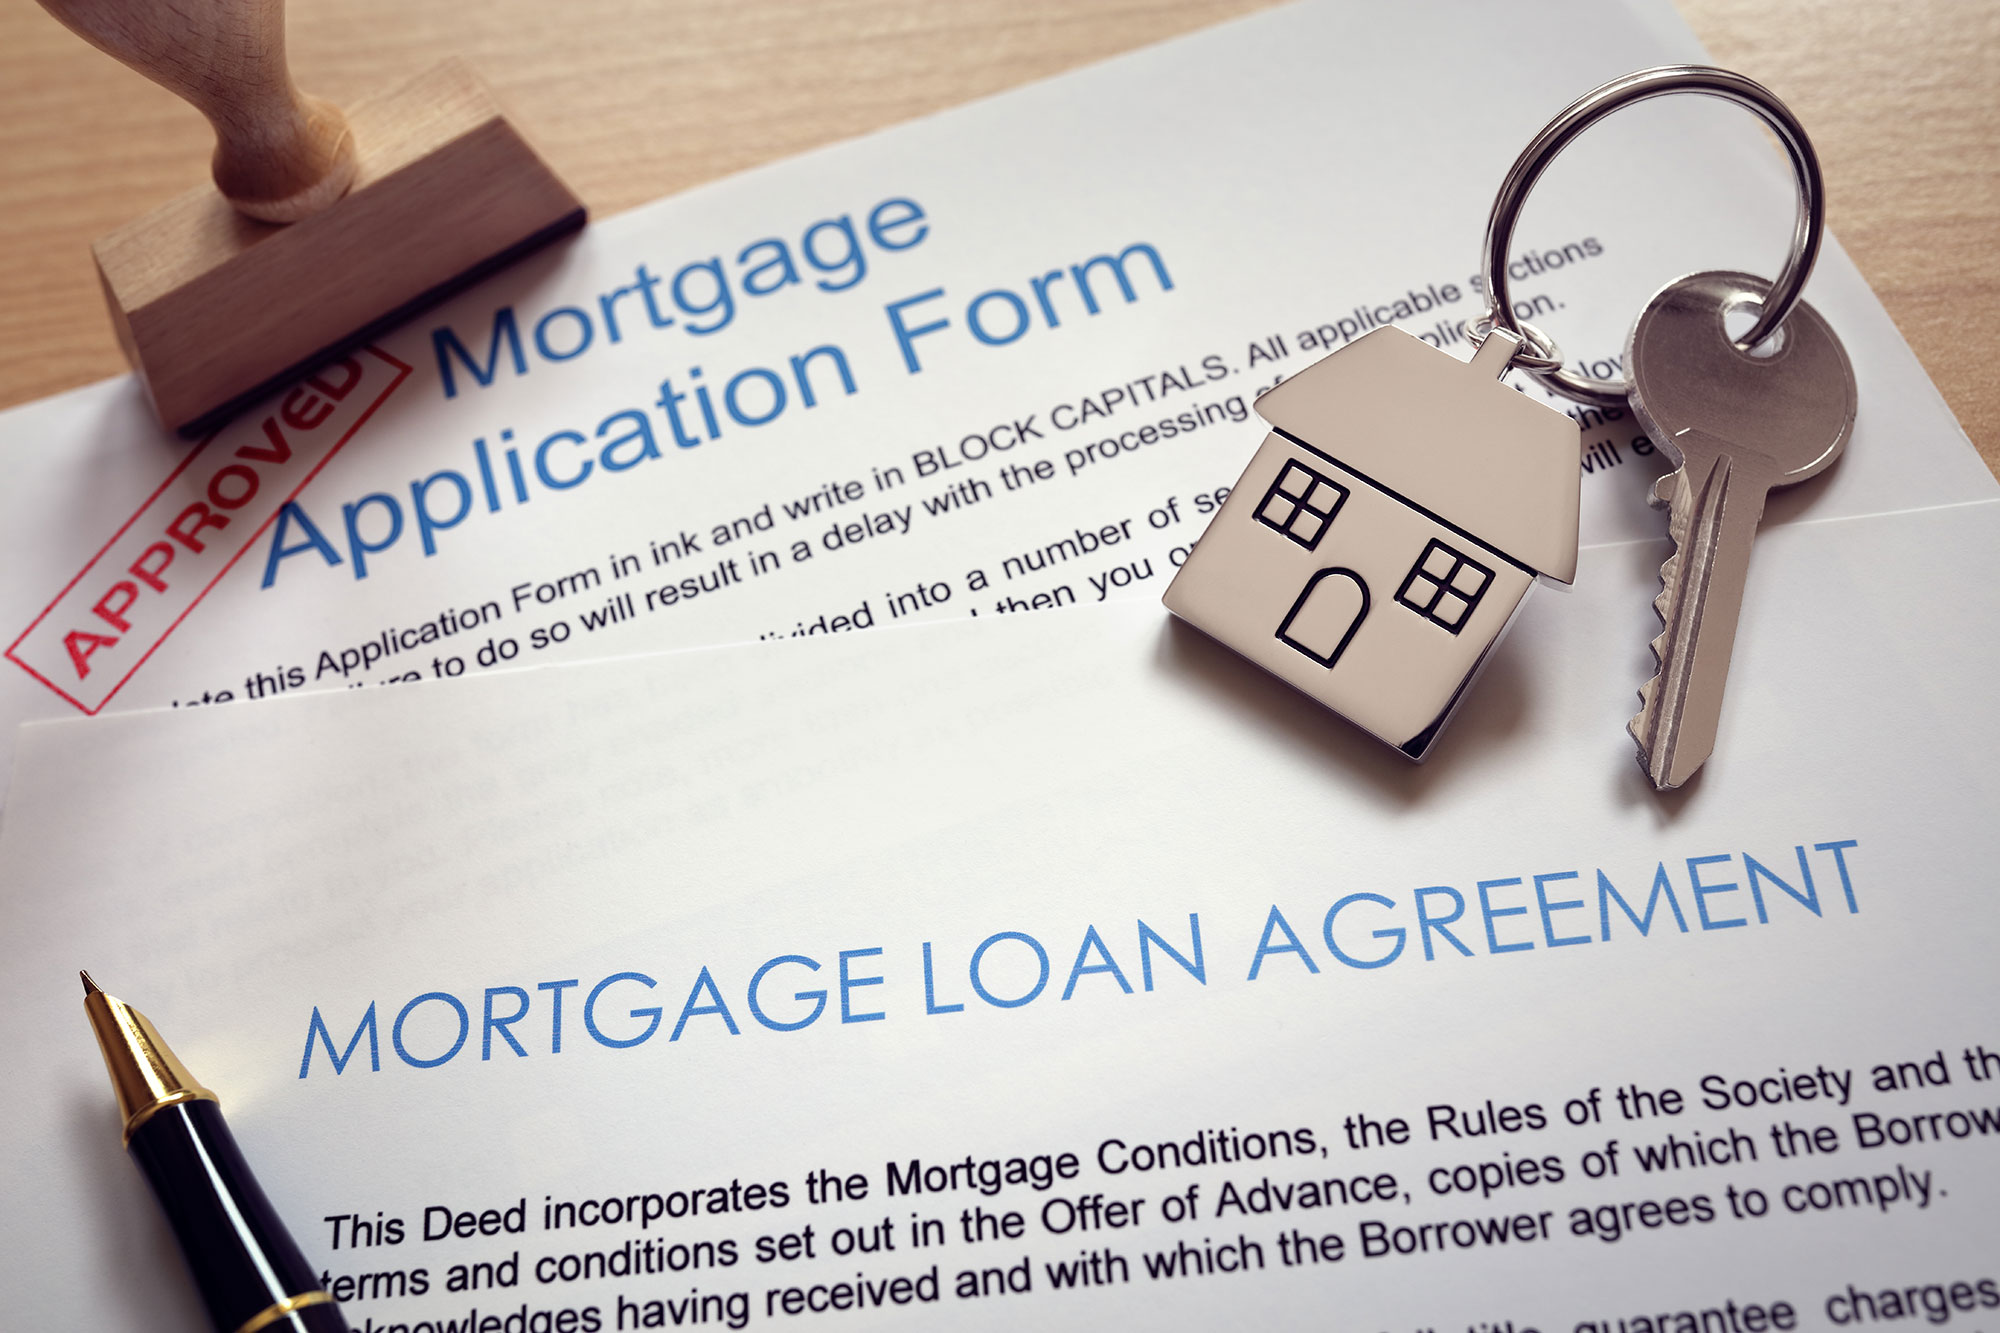 mortgage application loan agreement and house key P5ATR99